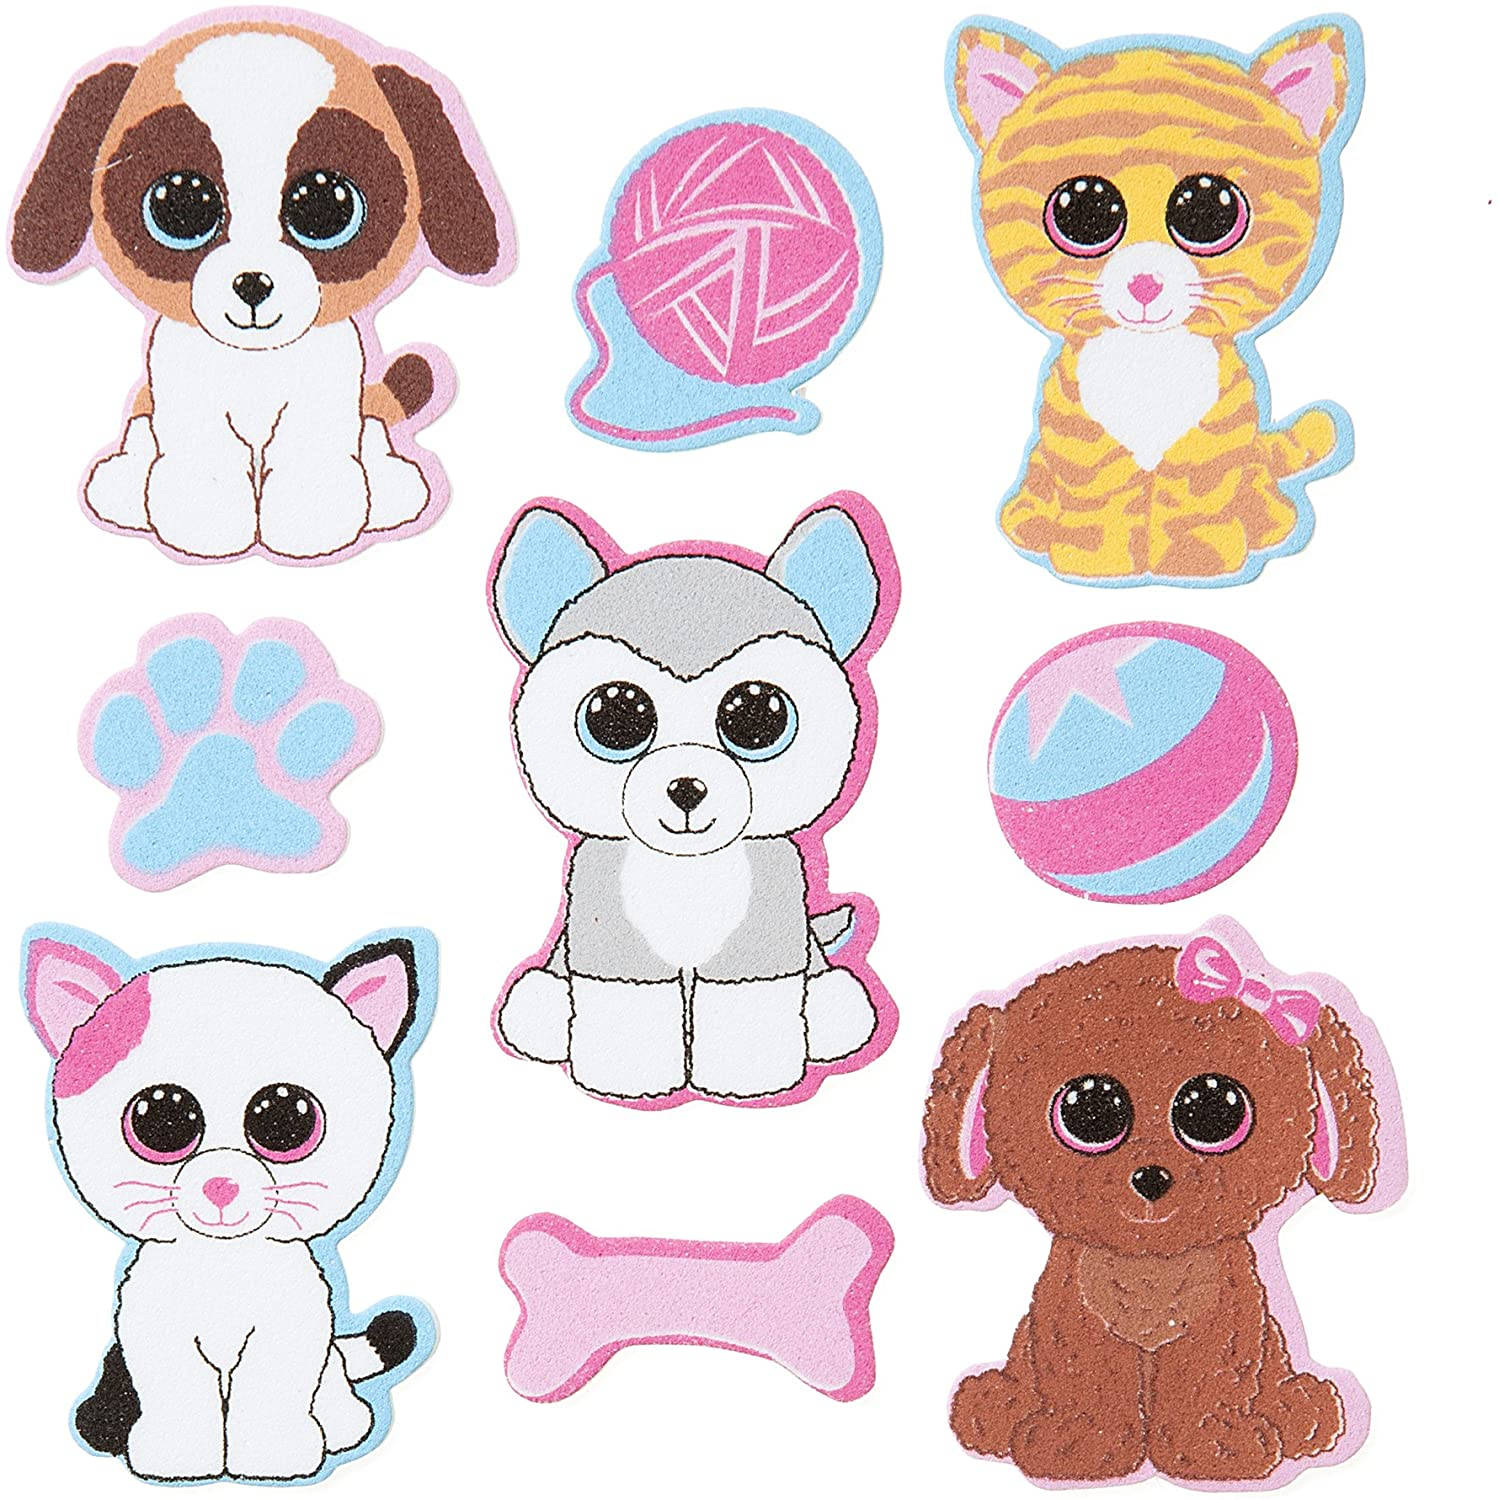 Cat And Dog Beanie Boos Background